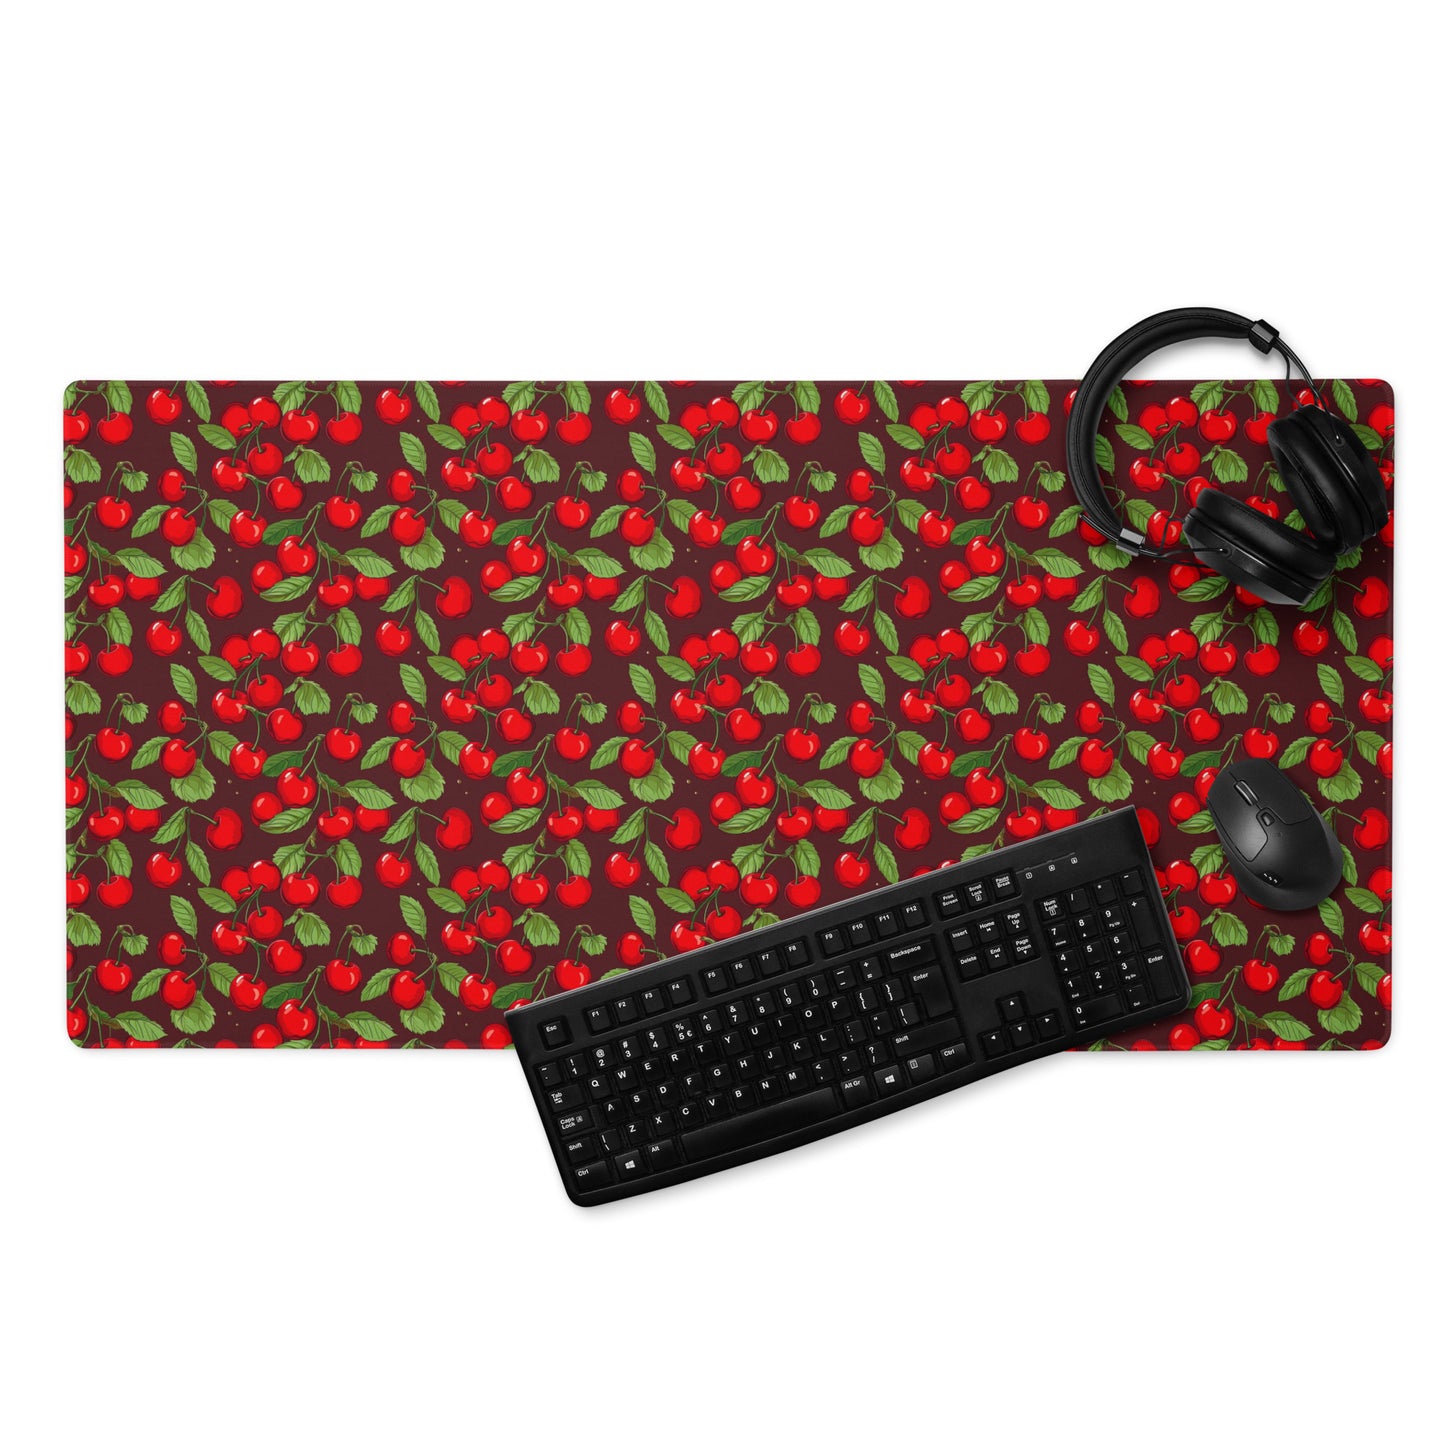 A 36" x 18" desk pad with cherries all over it displayed with a keyboard, heaphones and a mouse. Red in color.